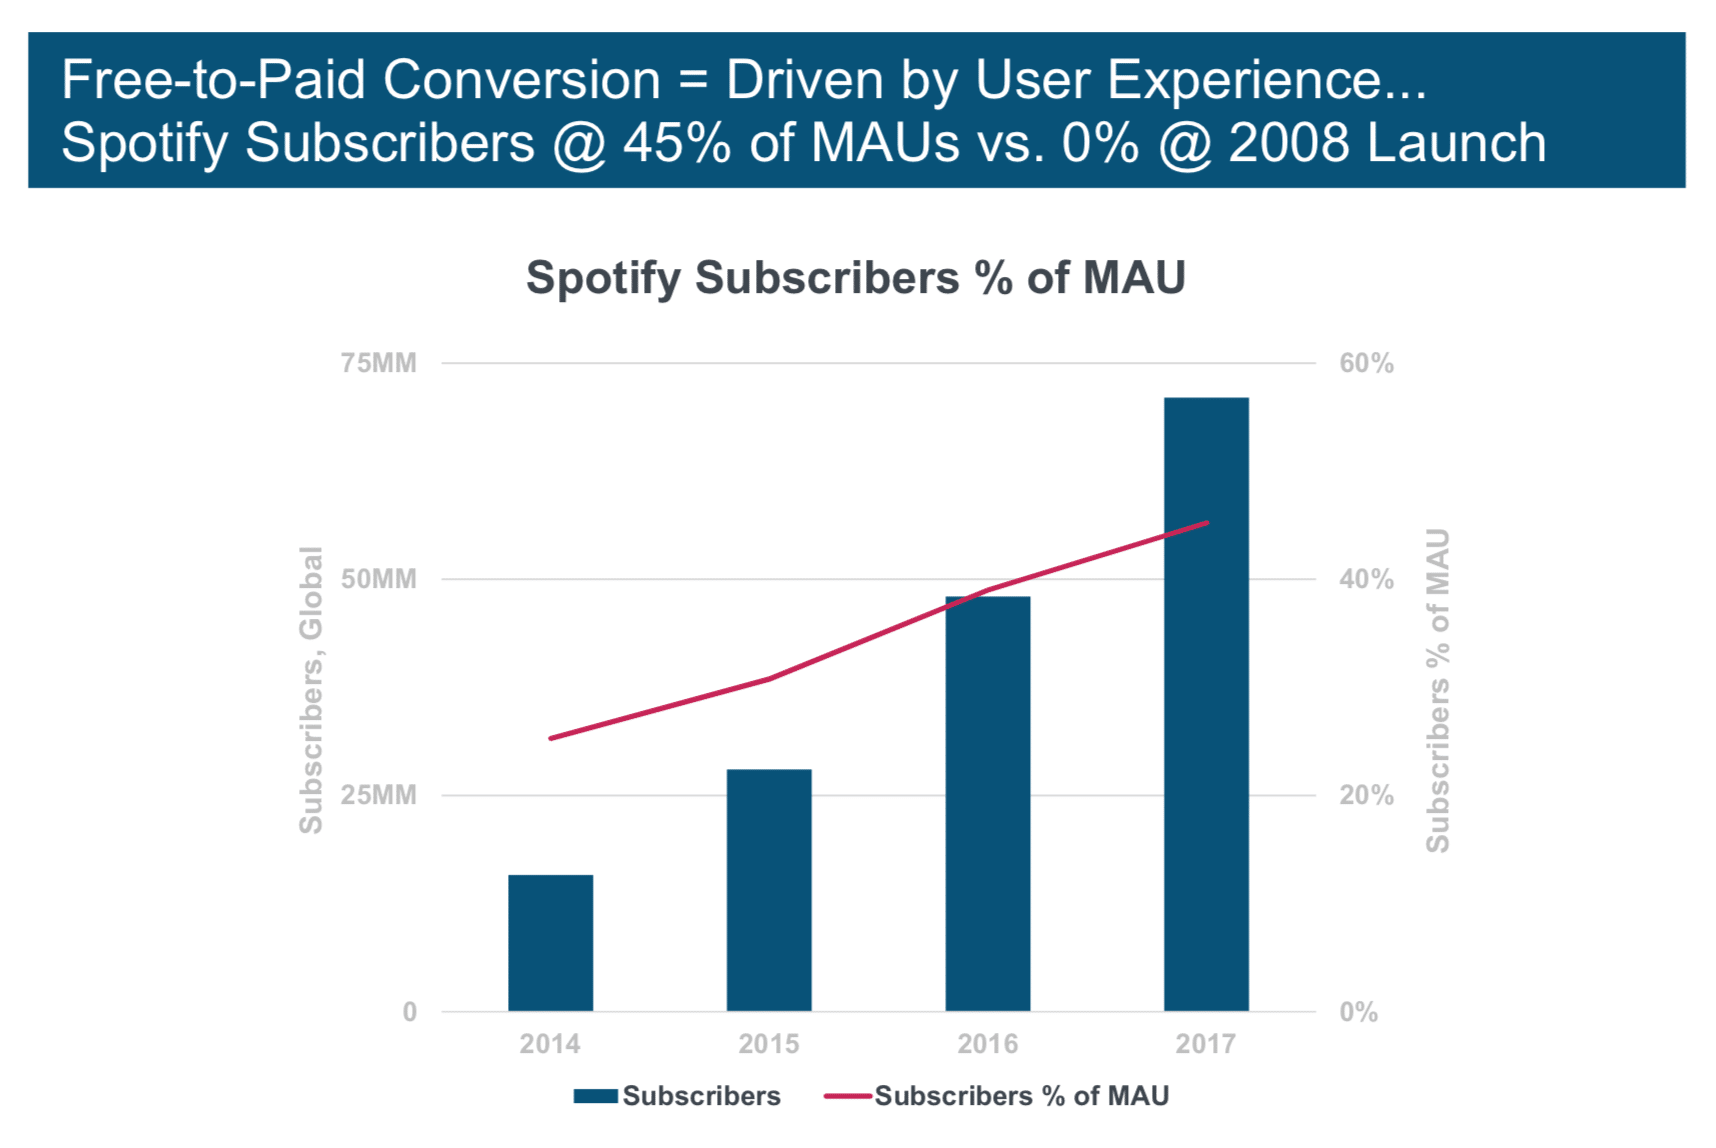 Spotify example of free to paid conversion rates for freemium subscription service providers